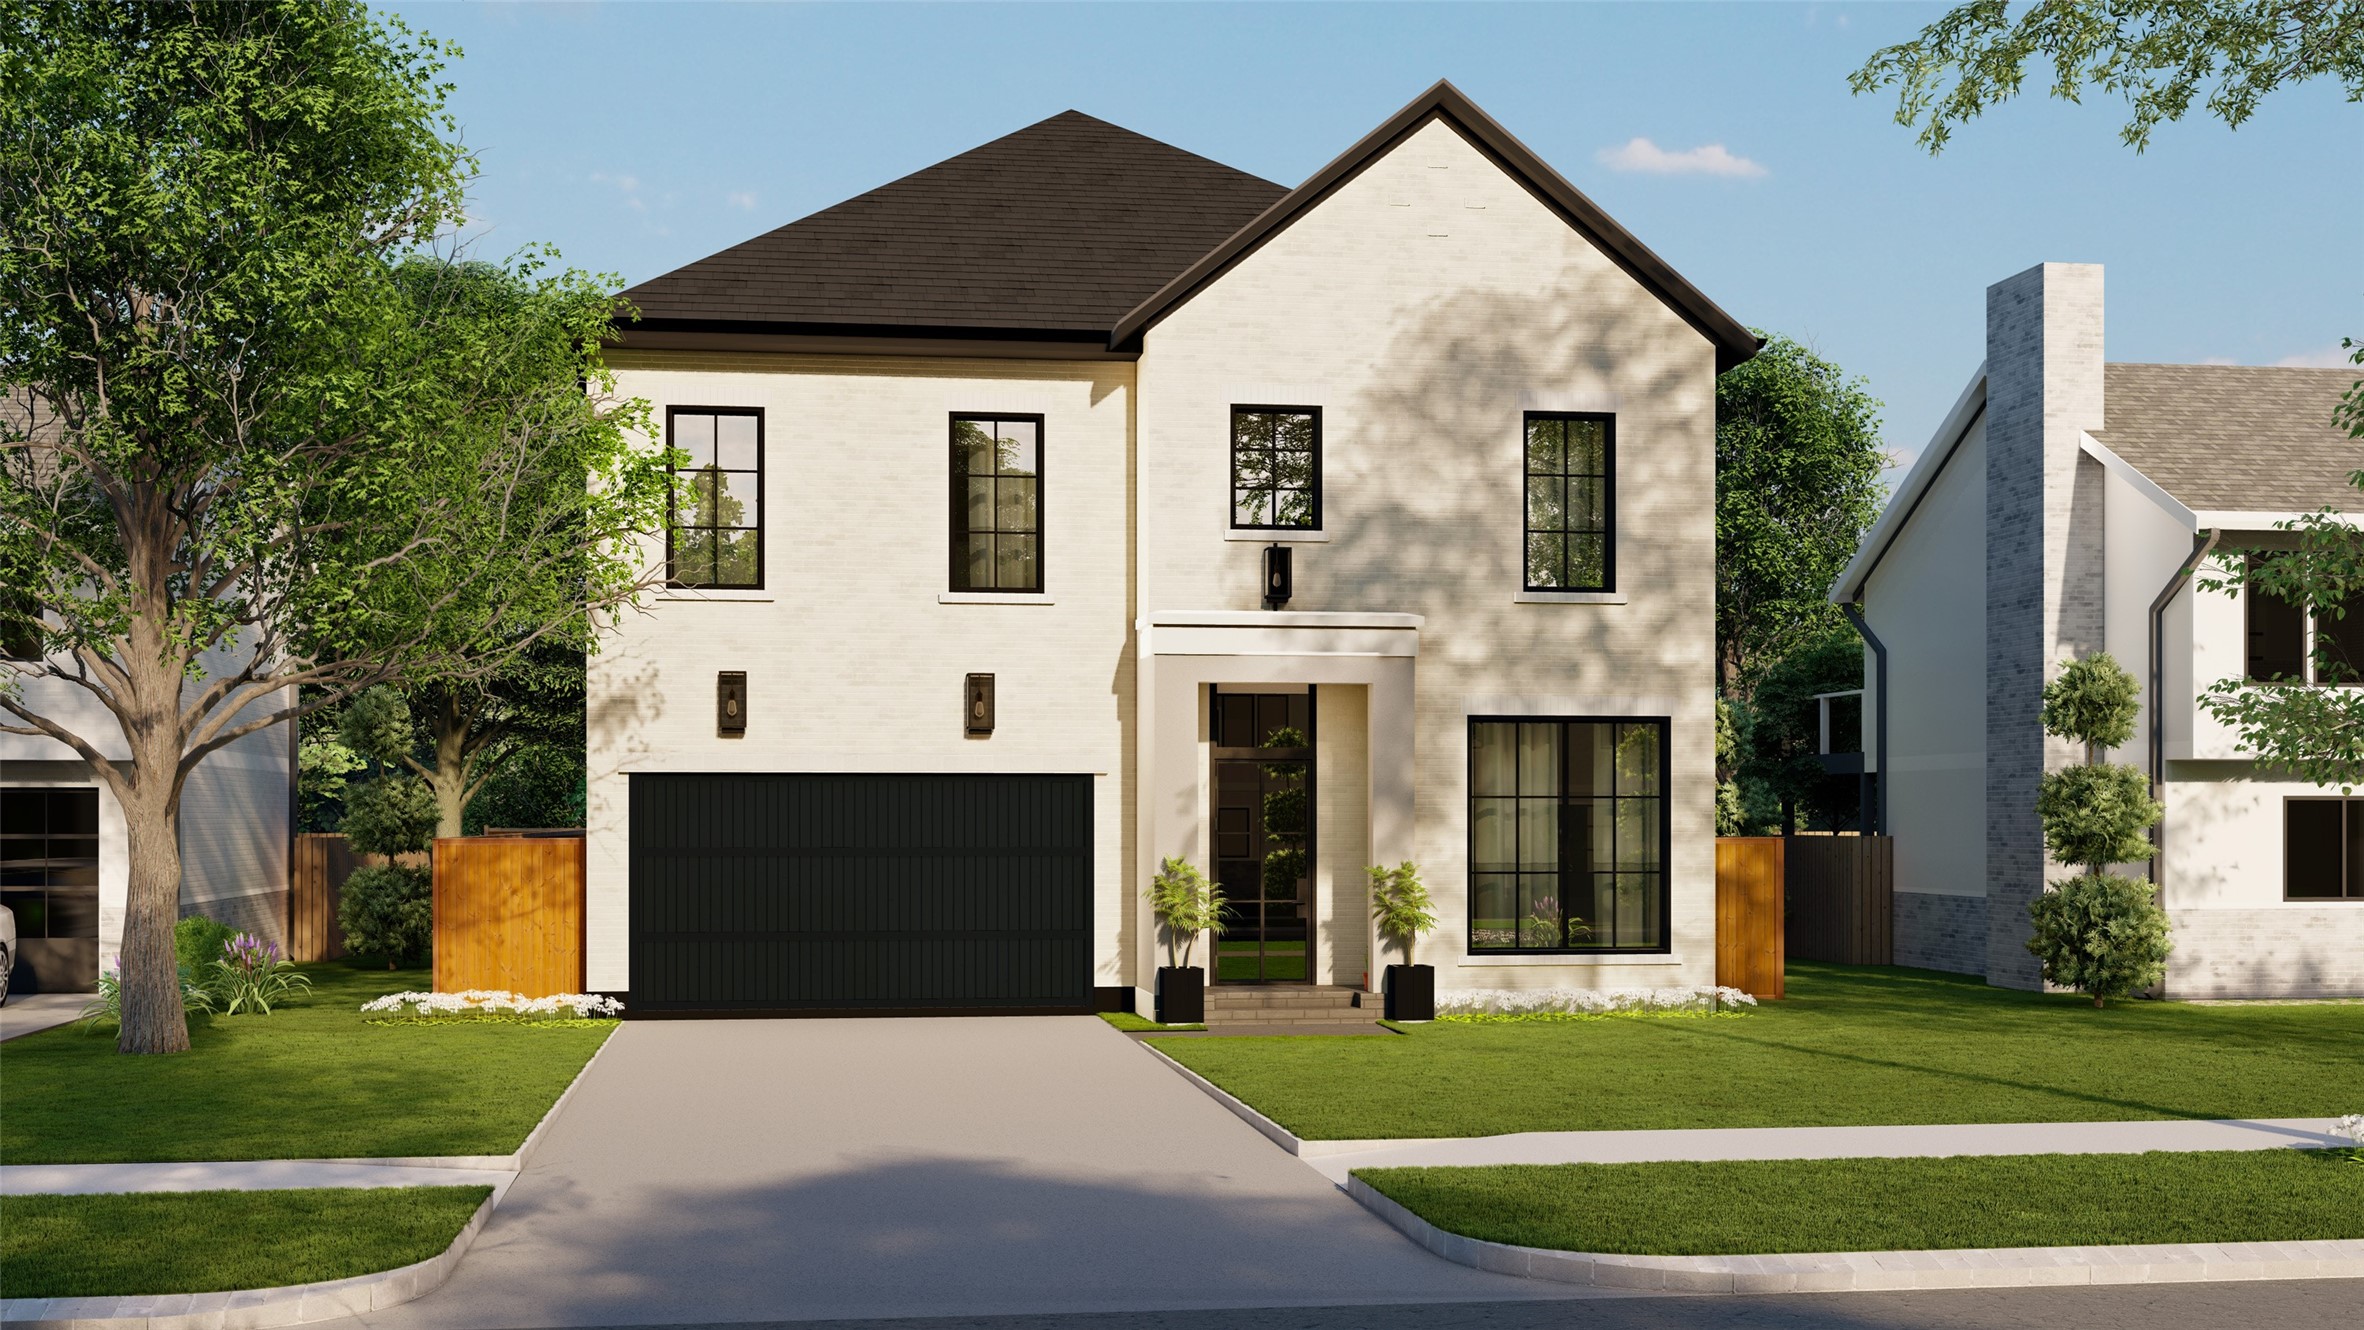 New Construction by Houston's Premier Home Builder, Croix Custom Homes! This Stunning Transitional Residence offers Incredible Interior Finishes, Painted Brick Exterior with Hardie Plank Siding, and a Great Floor Plan!